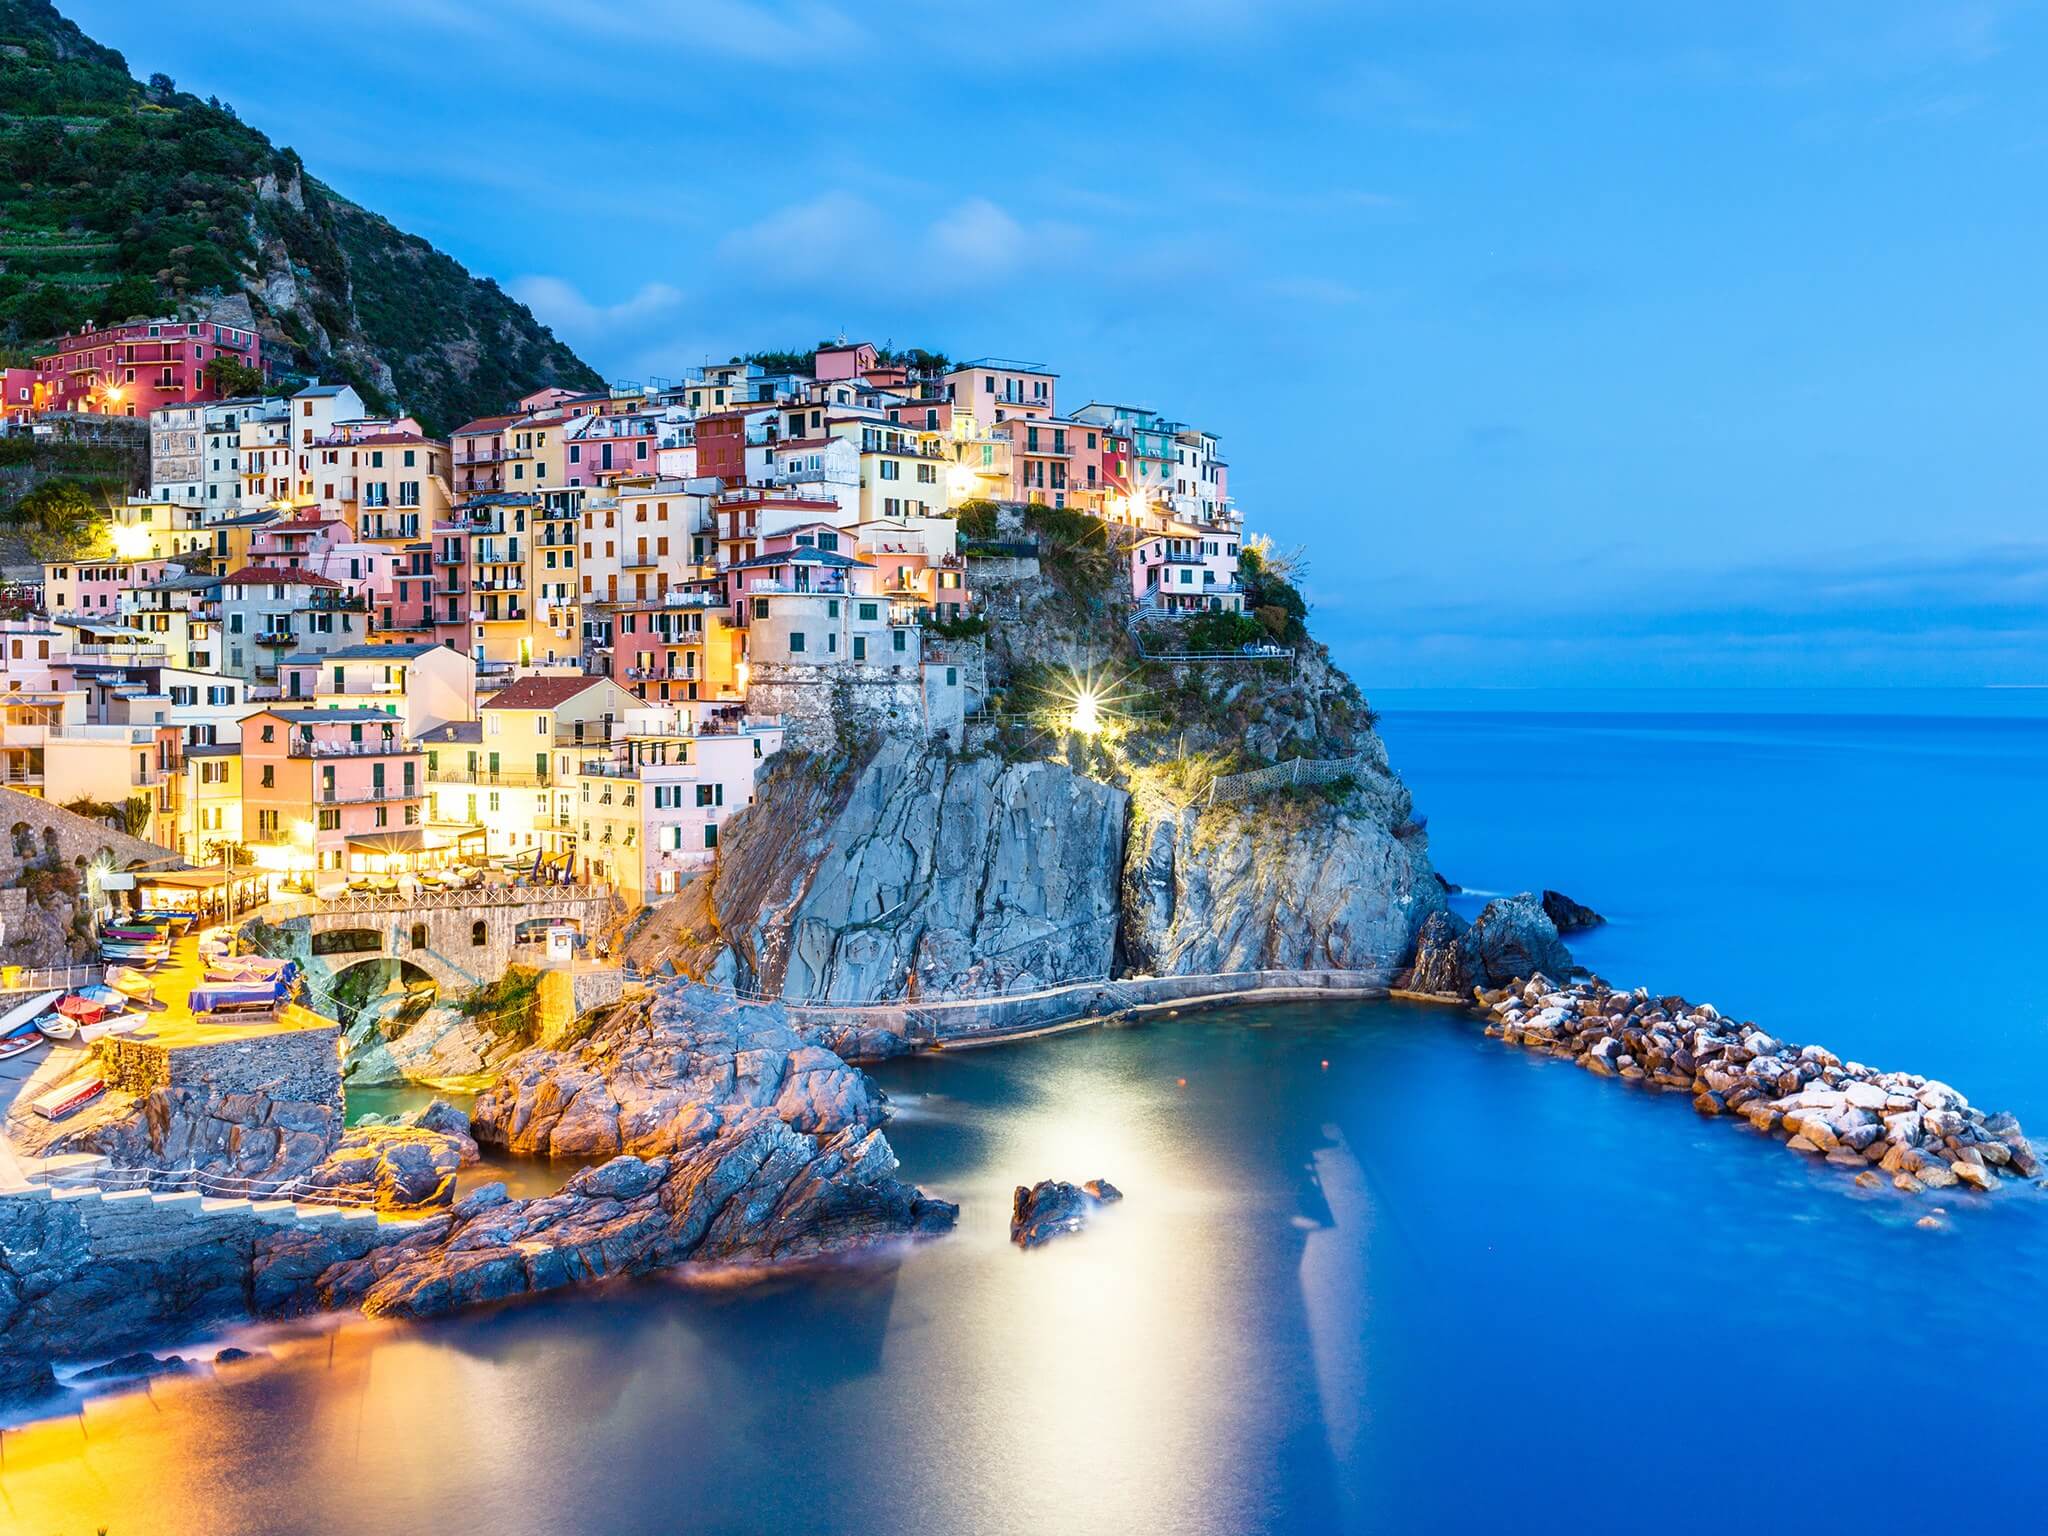 Italy - Places to travel solo in 2021